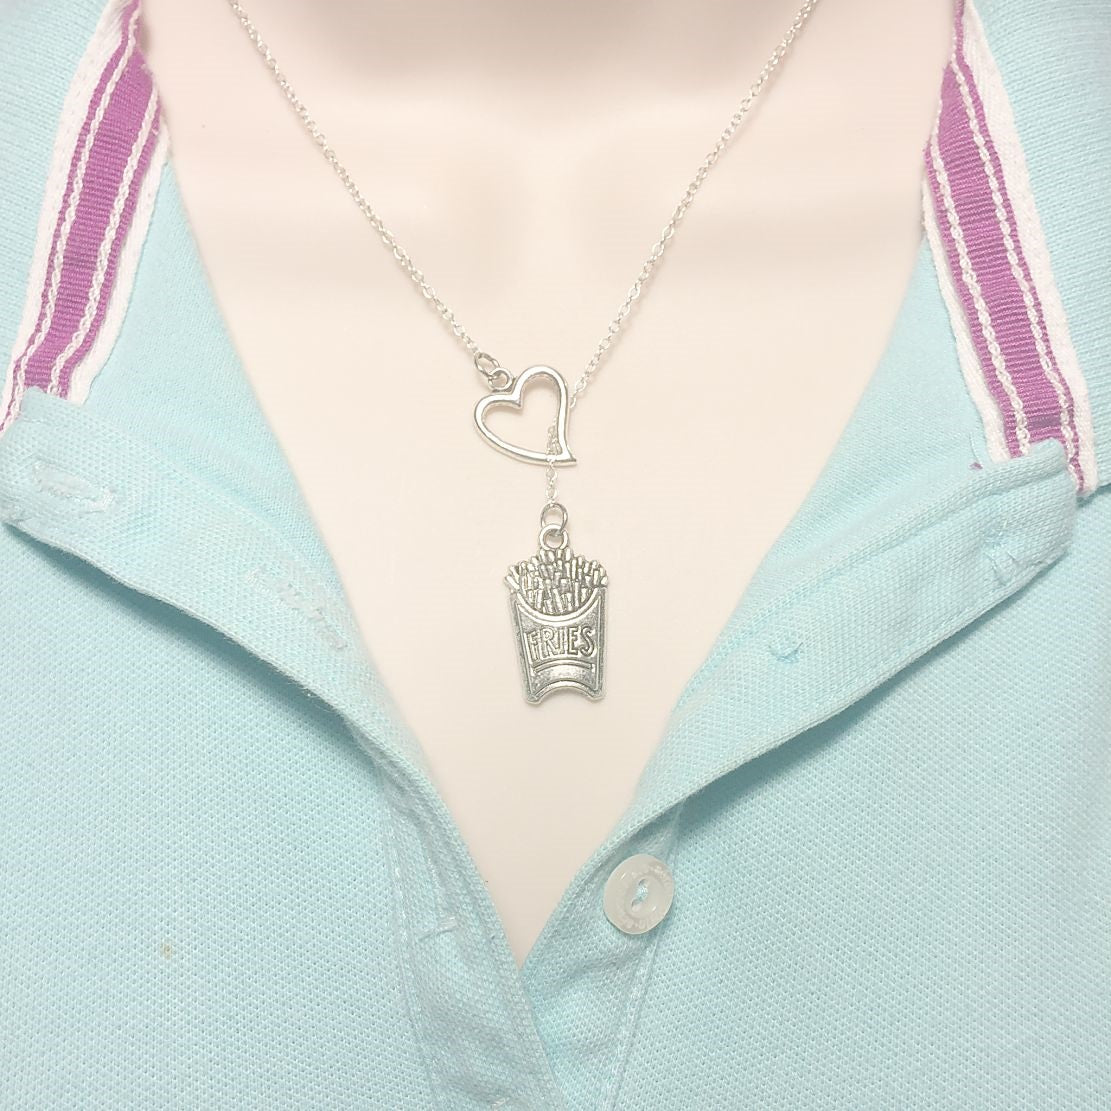 I Love McDonald French Fries Handcrafted Lariat Y Necklace.